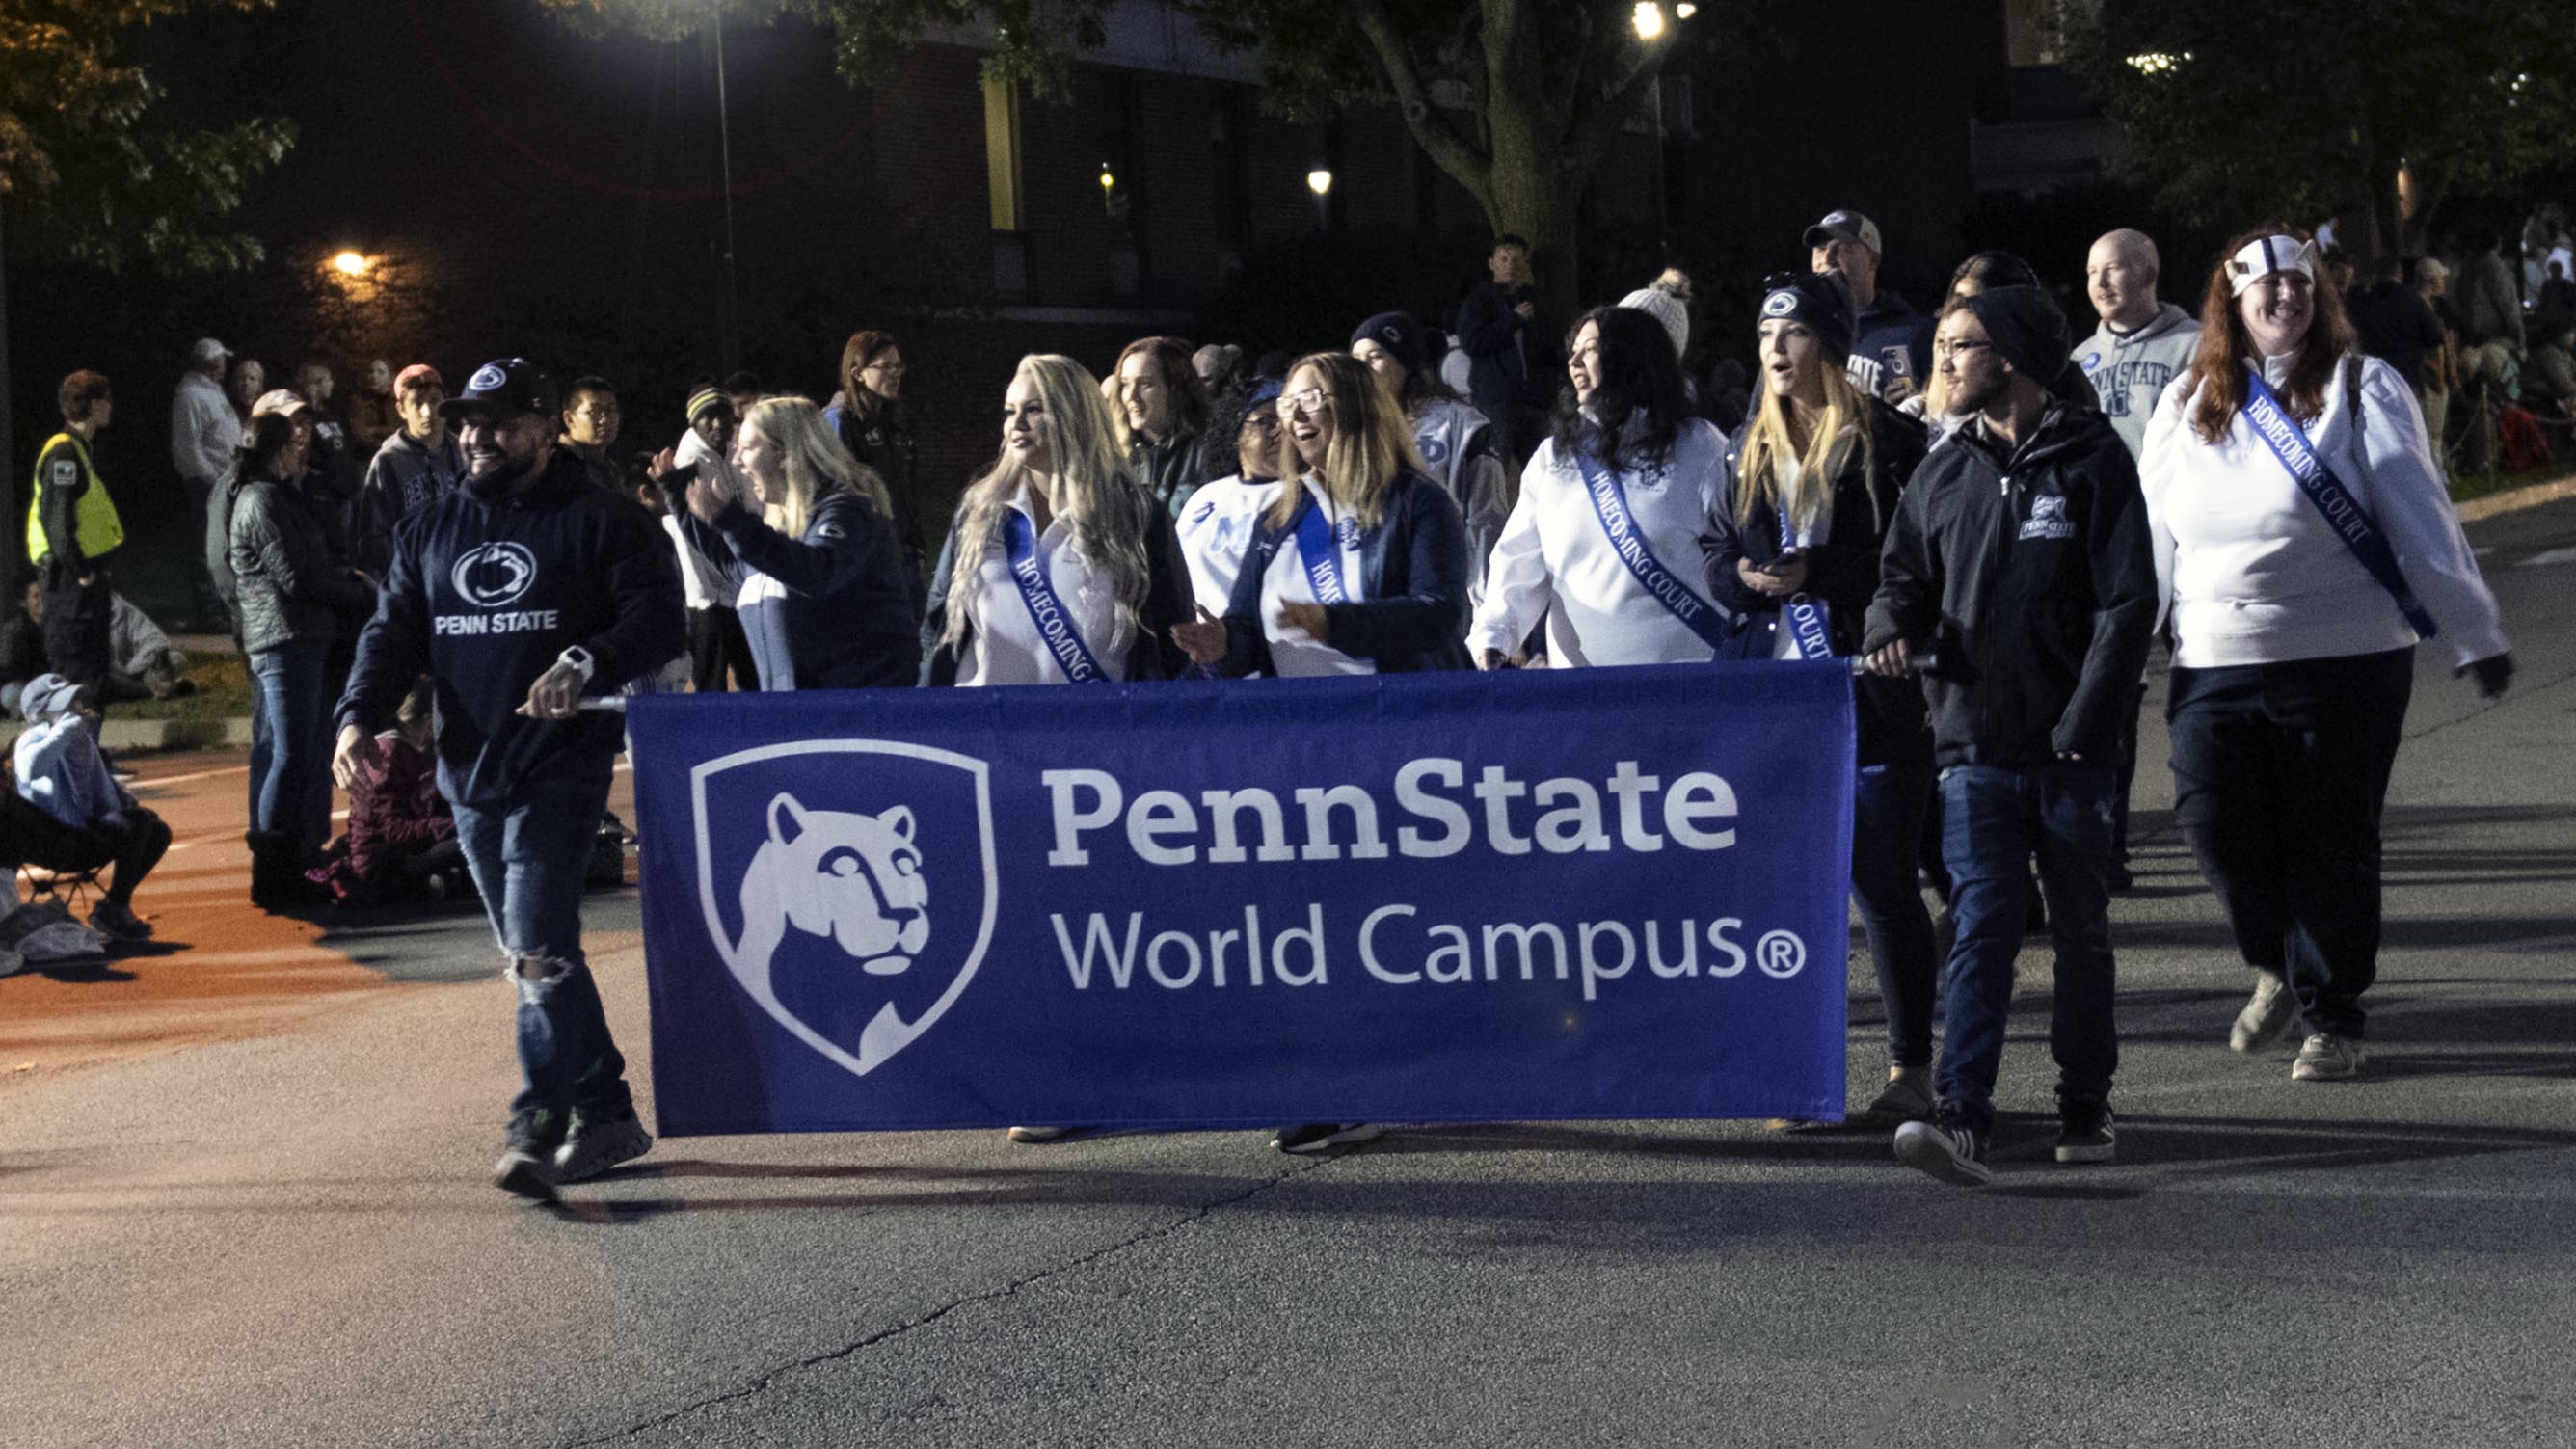 Members of the Penn State World Campus Homecoming Committee and Court walk in the homecoming parade, carrying a World Campus banner.